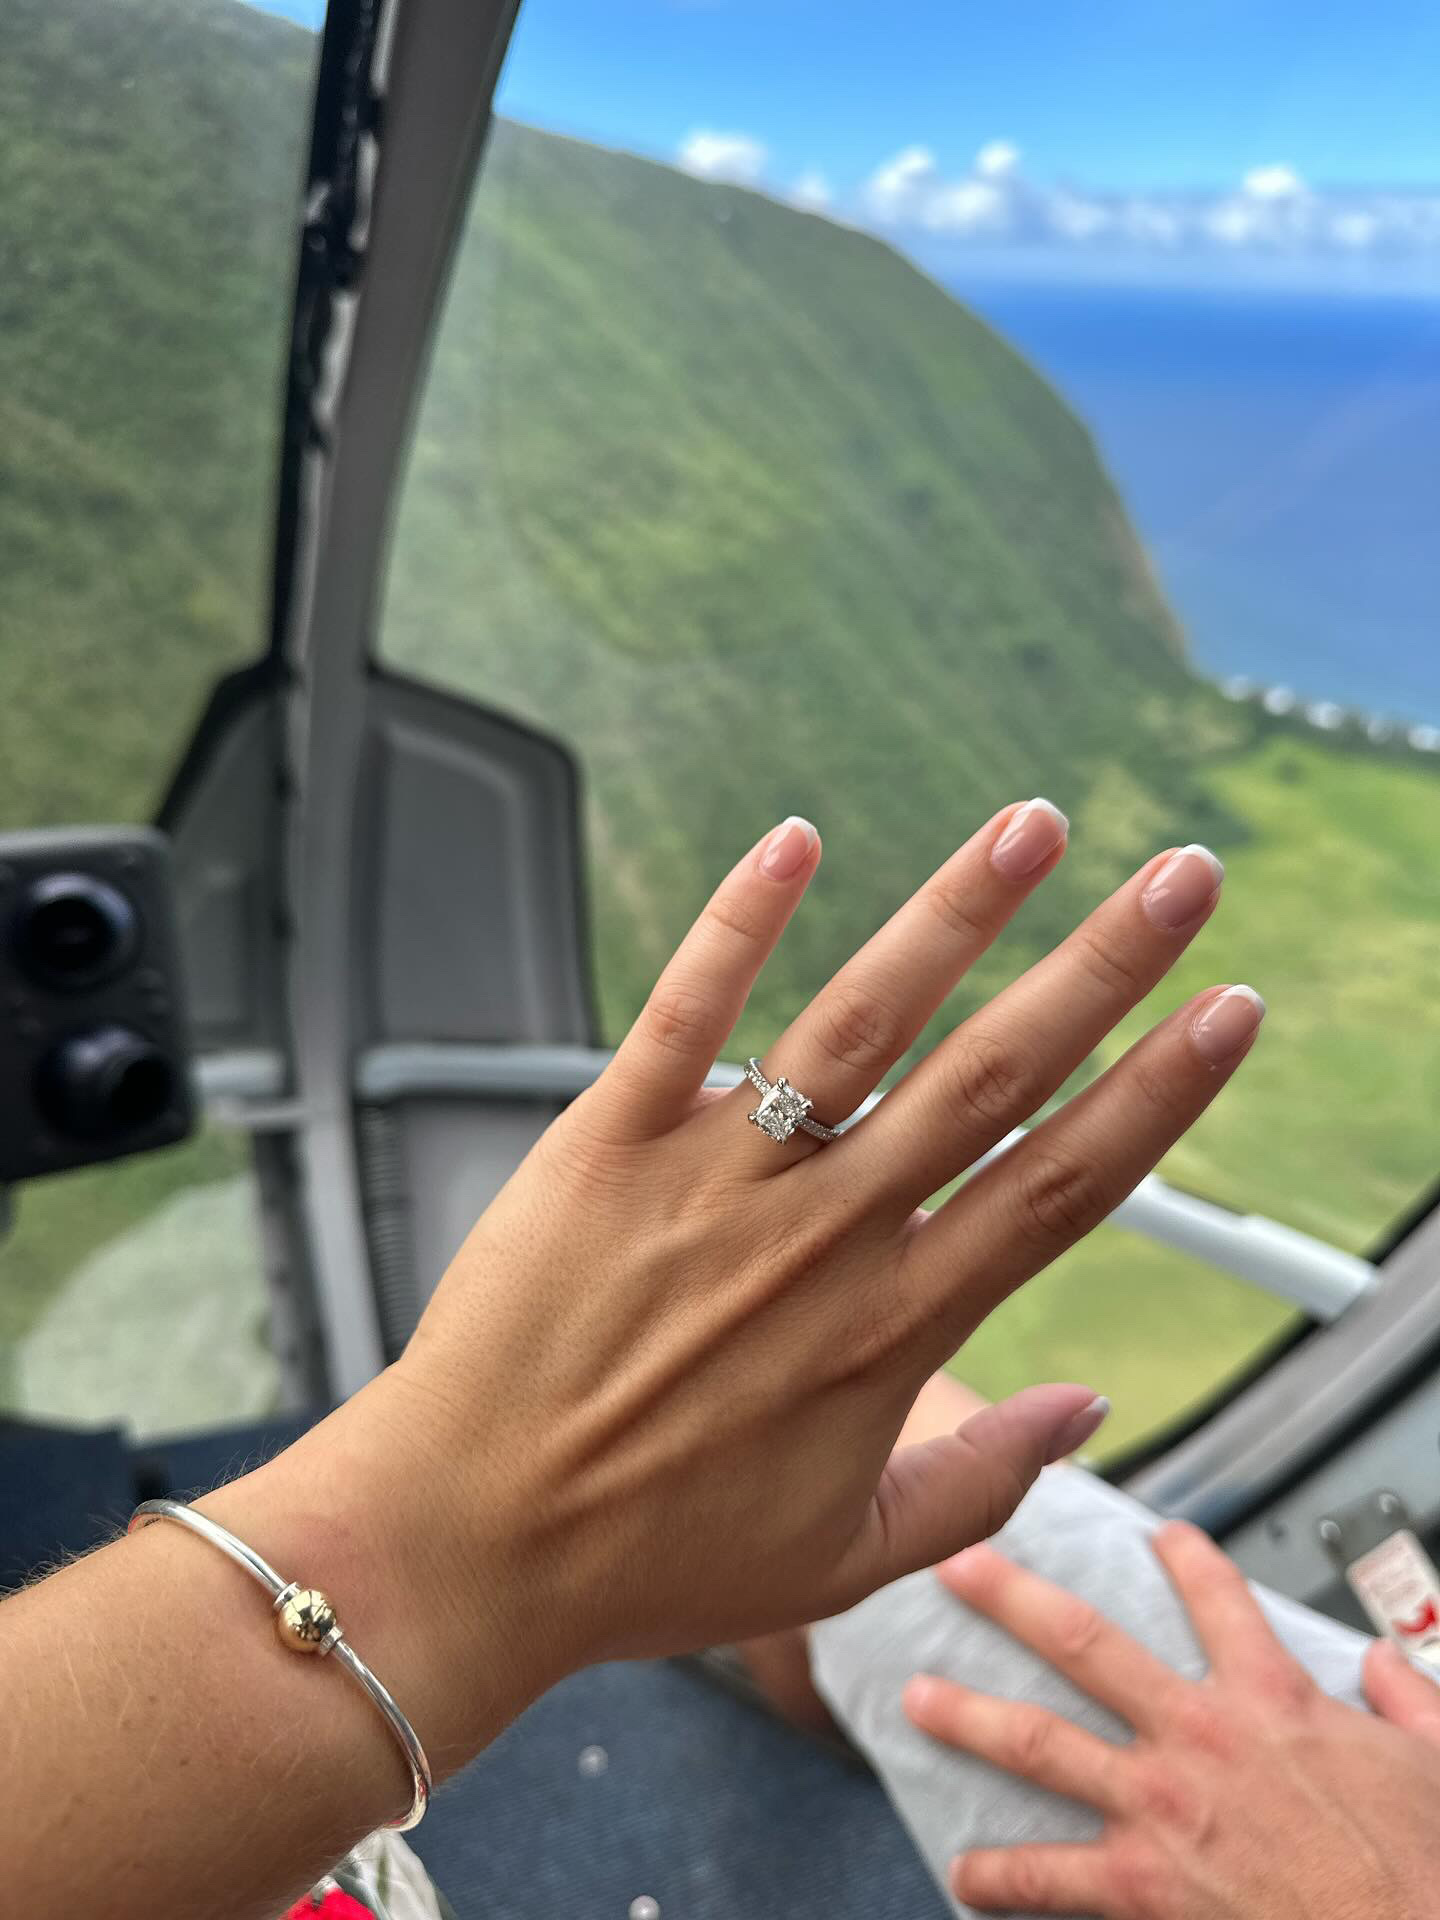 Propose in Helicopter